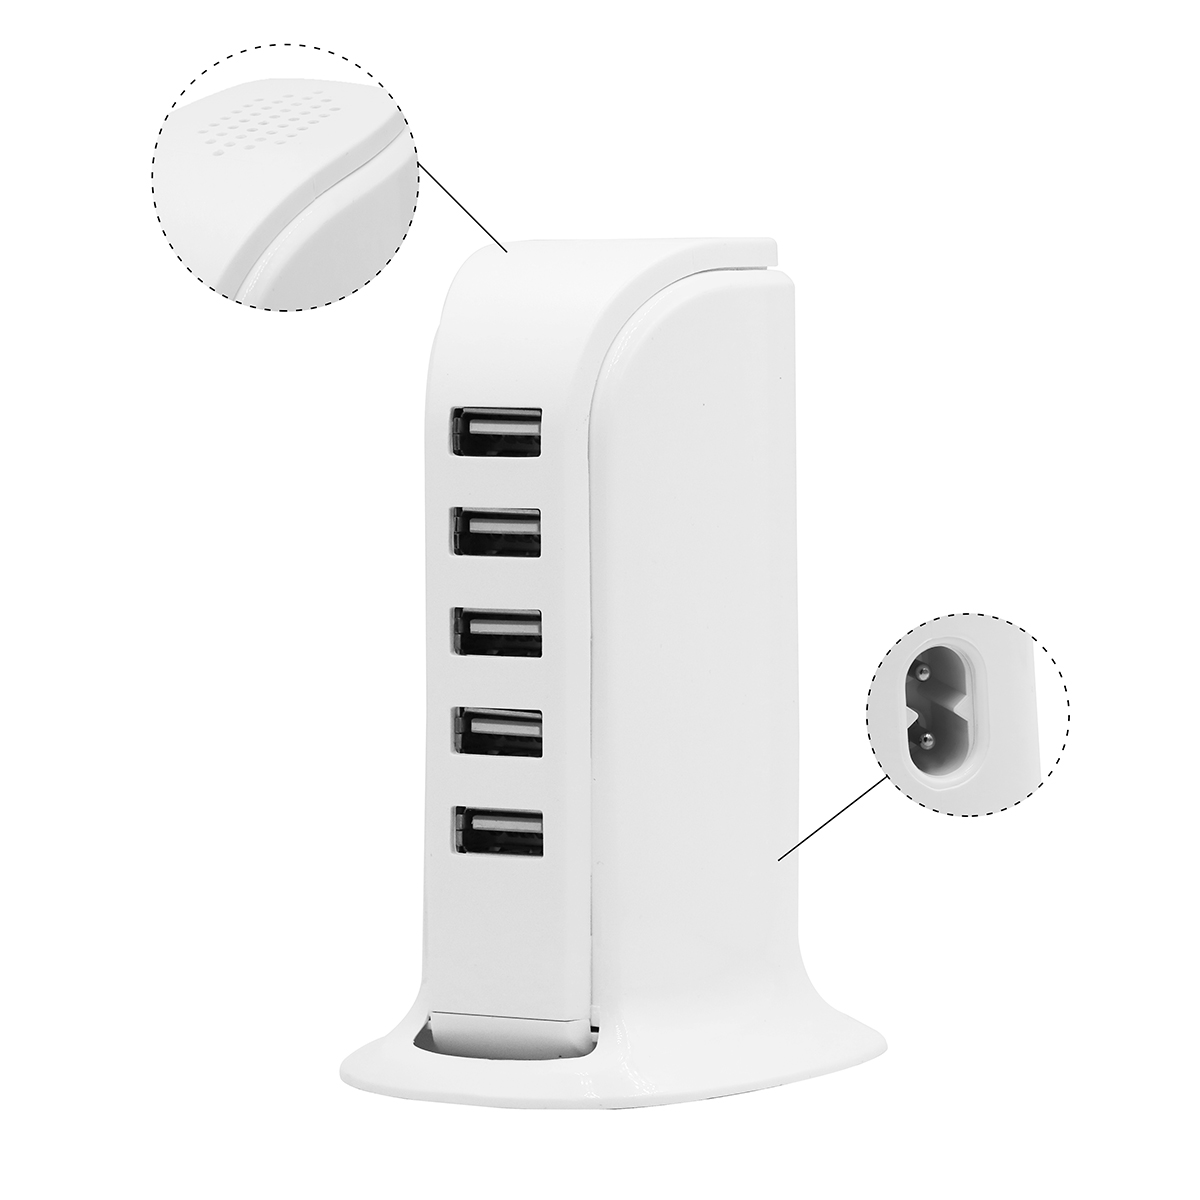 6. LM-J32 30W 5 USB Port Charger Station Bulk Purchase and Corporate purchase from China Union Power -Description-